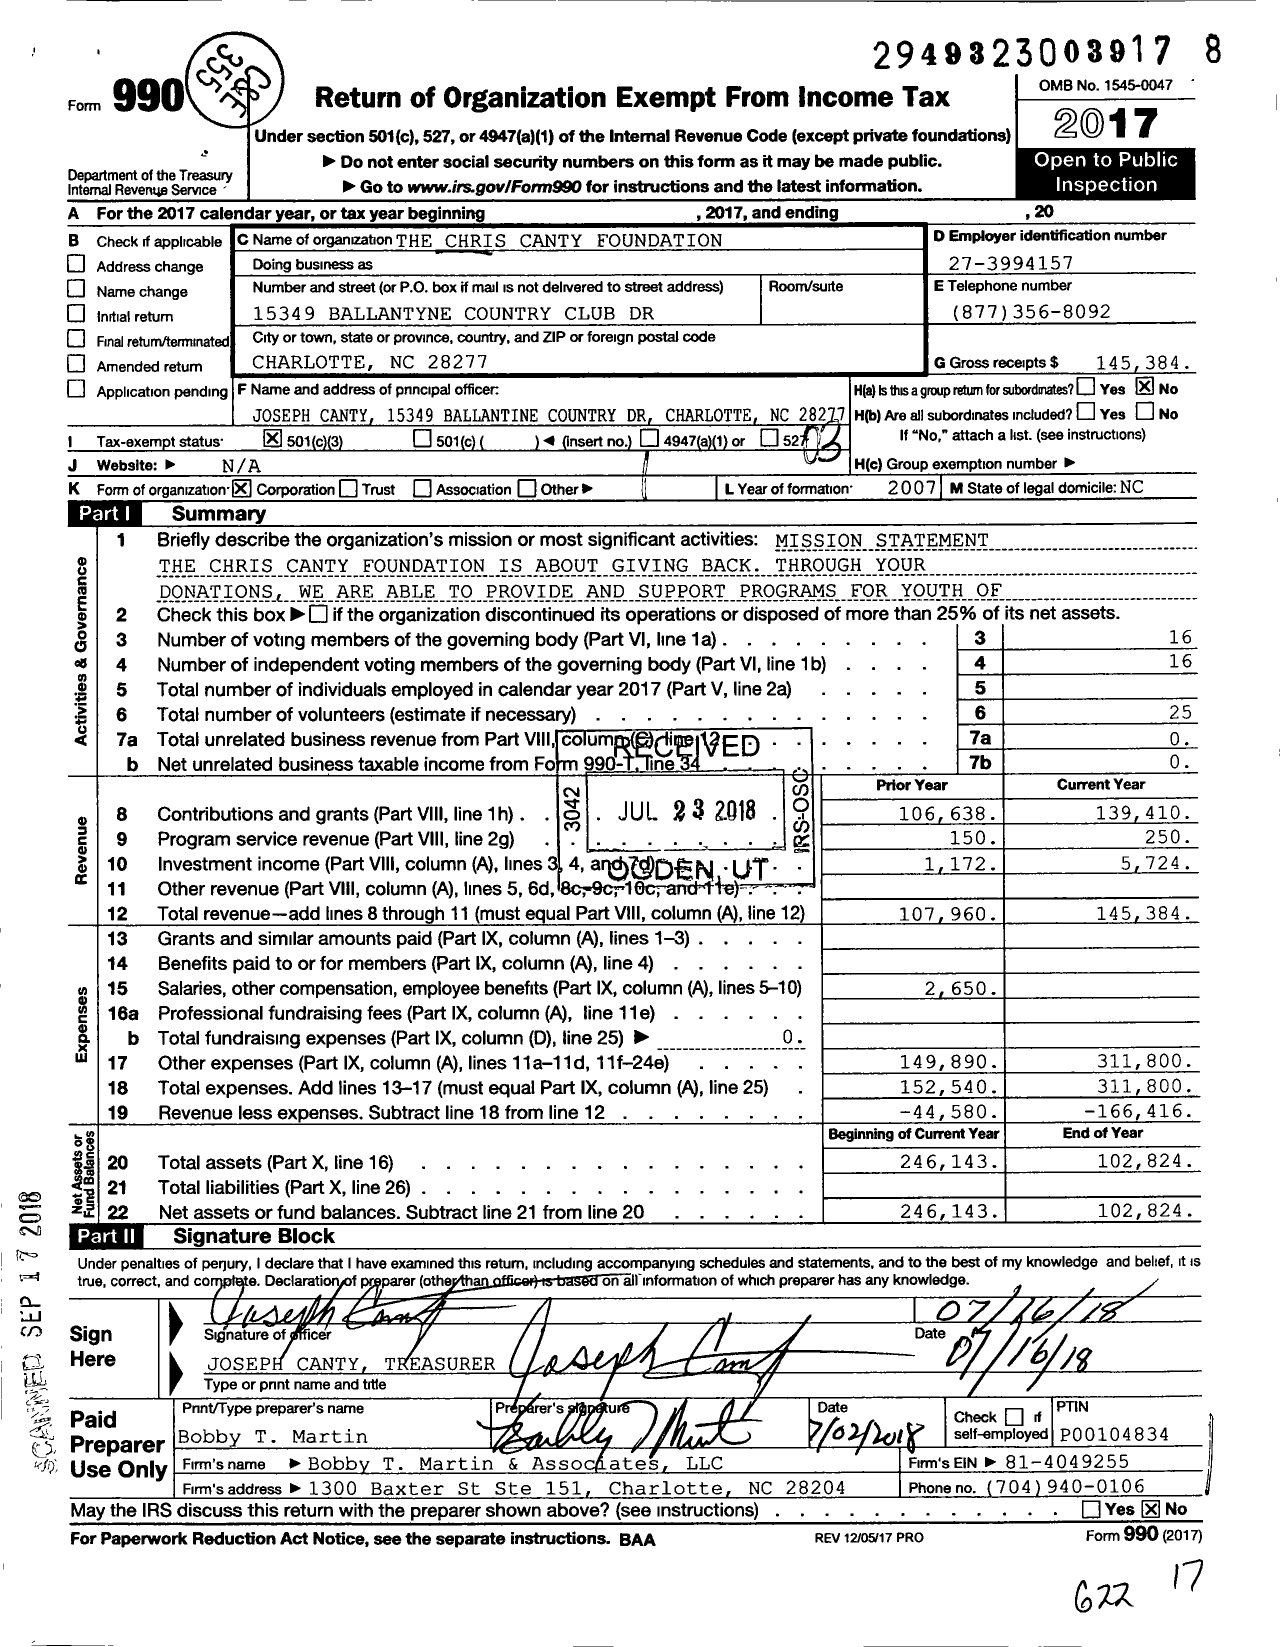 Image of first page of 2017 Form 990 for Chris Canty Foundation